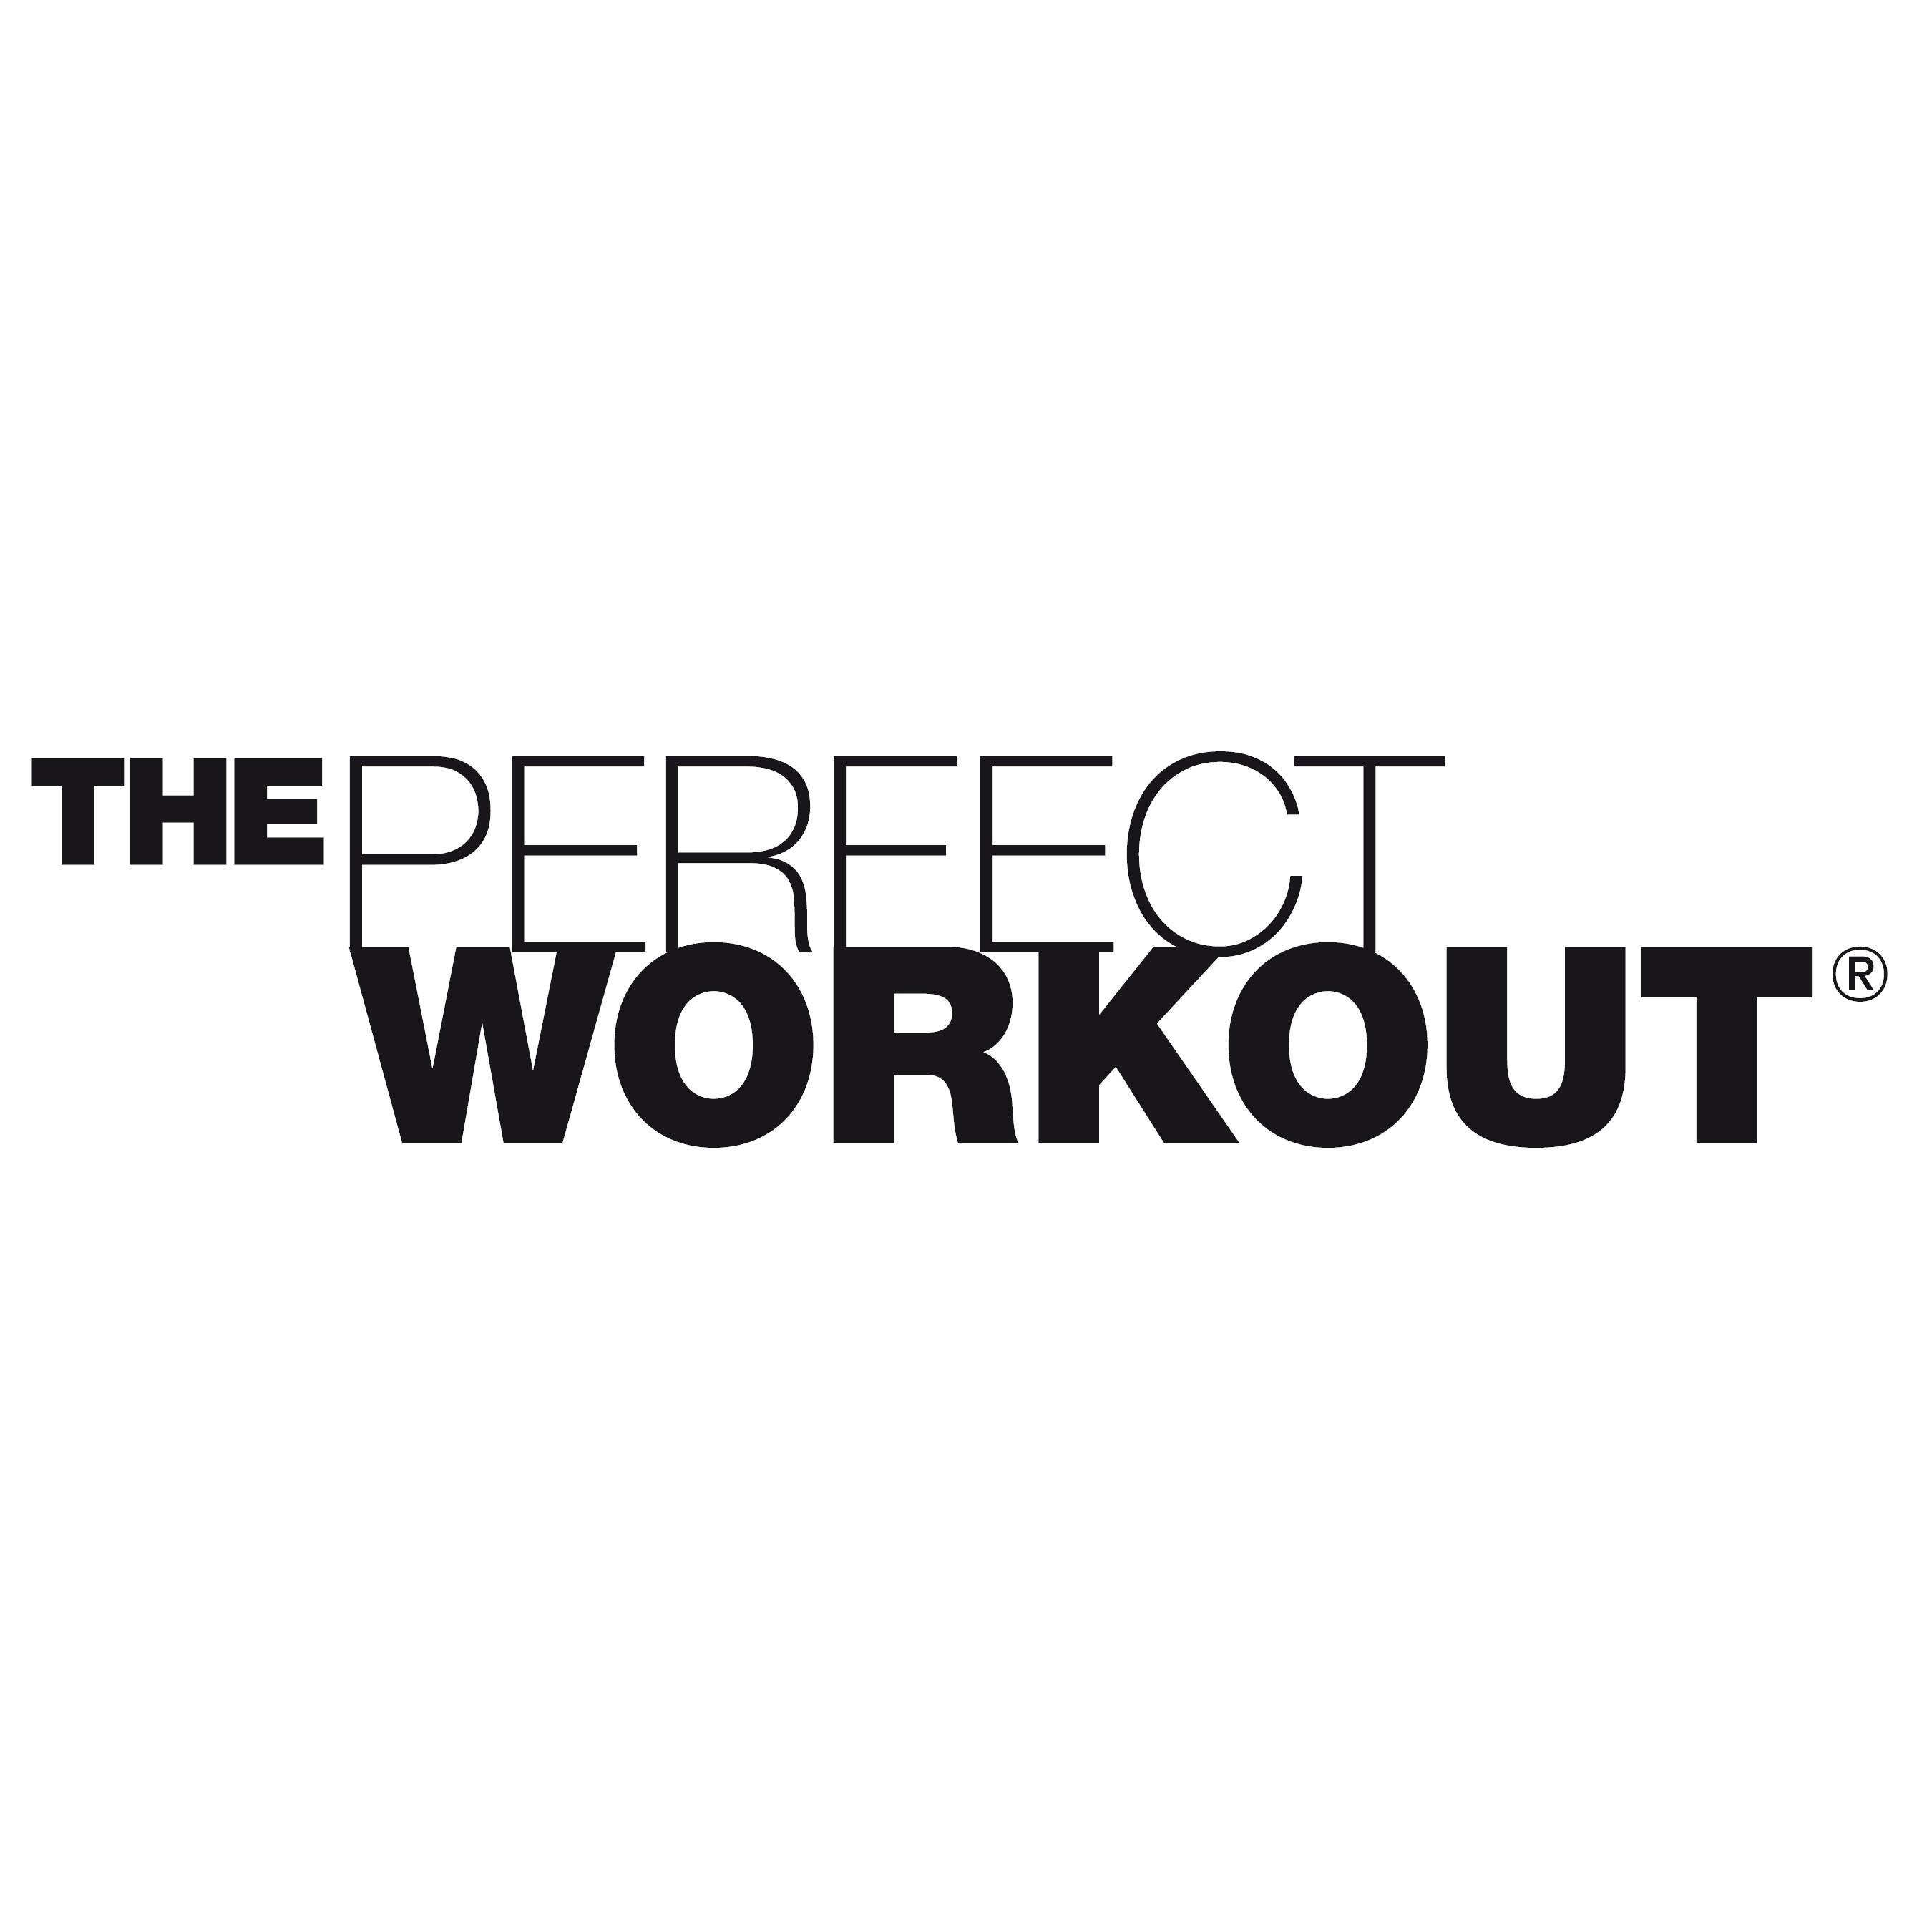 The Perfect Workout - Tustin, CA 92780 - (844)403-1120 | ShowMeLocal.com